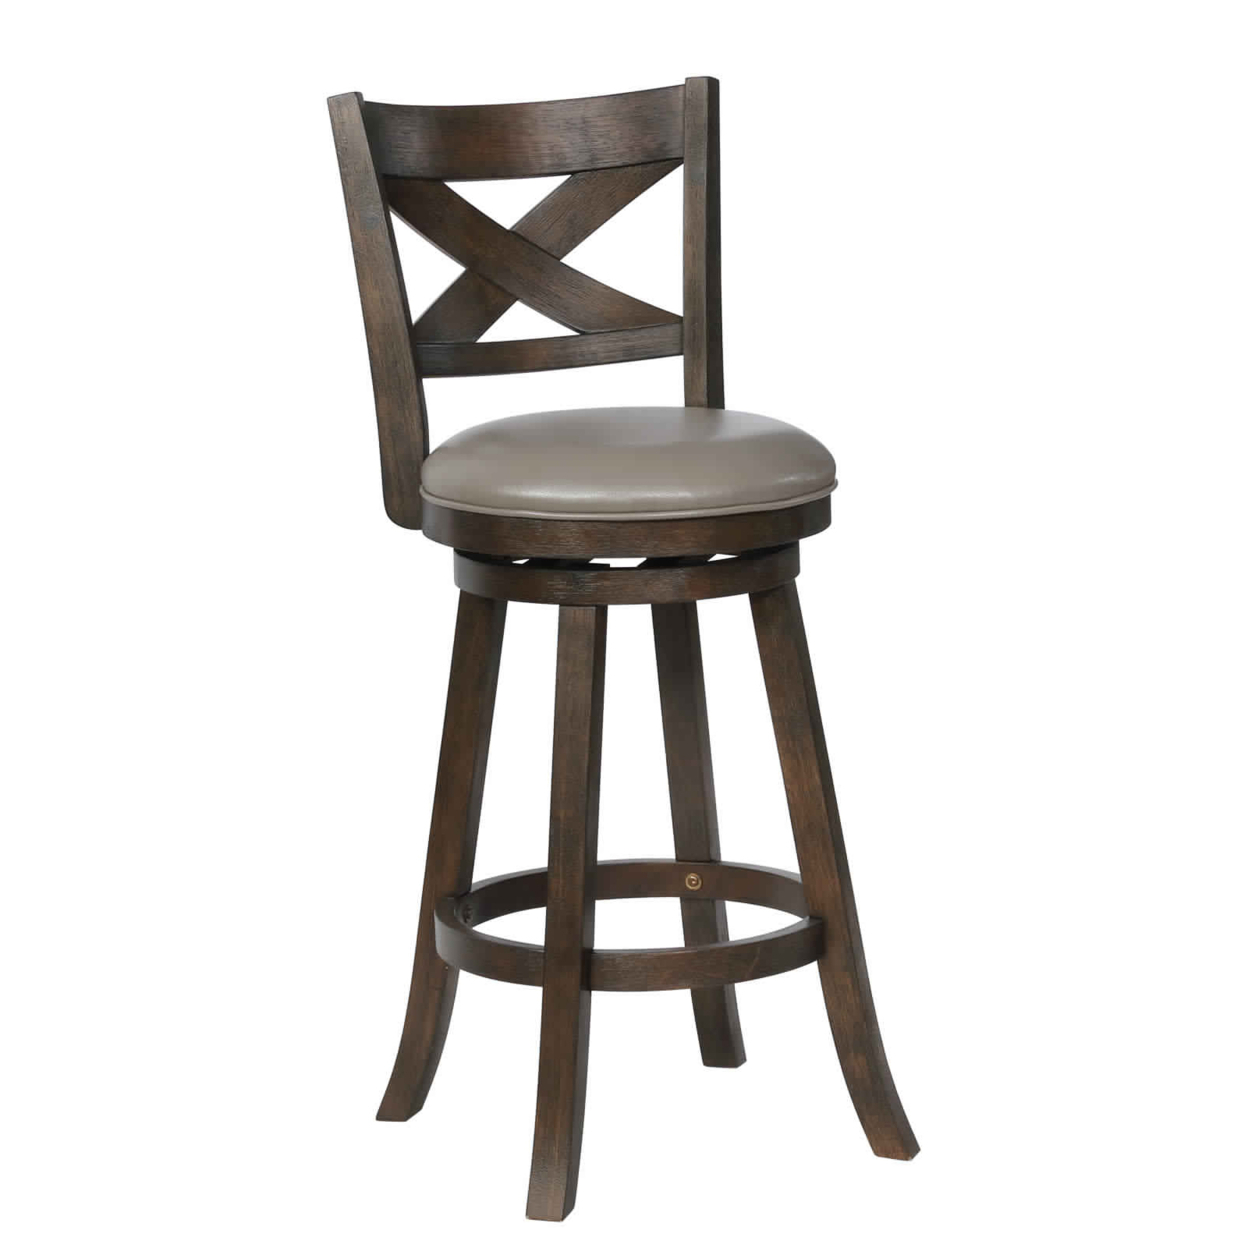 Curved Back Swivel Bar Stool With Leatherette Seat,Set Of 2, Gray And Brown- Saltoro Sherpi